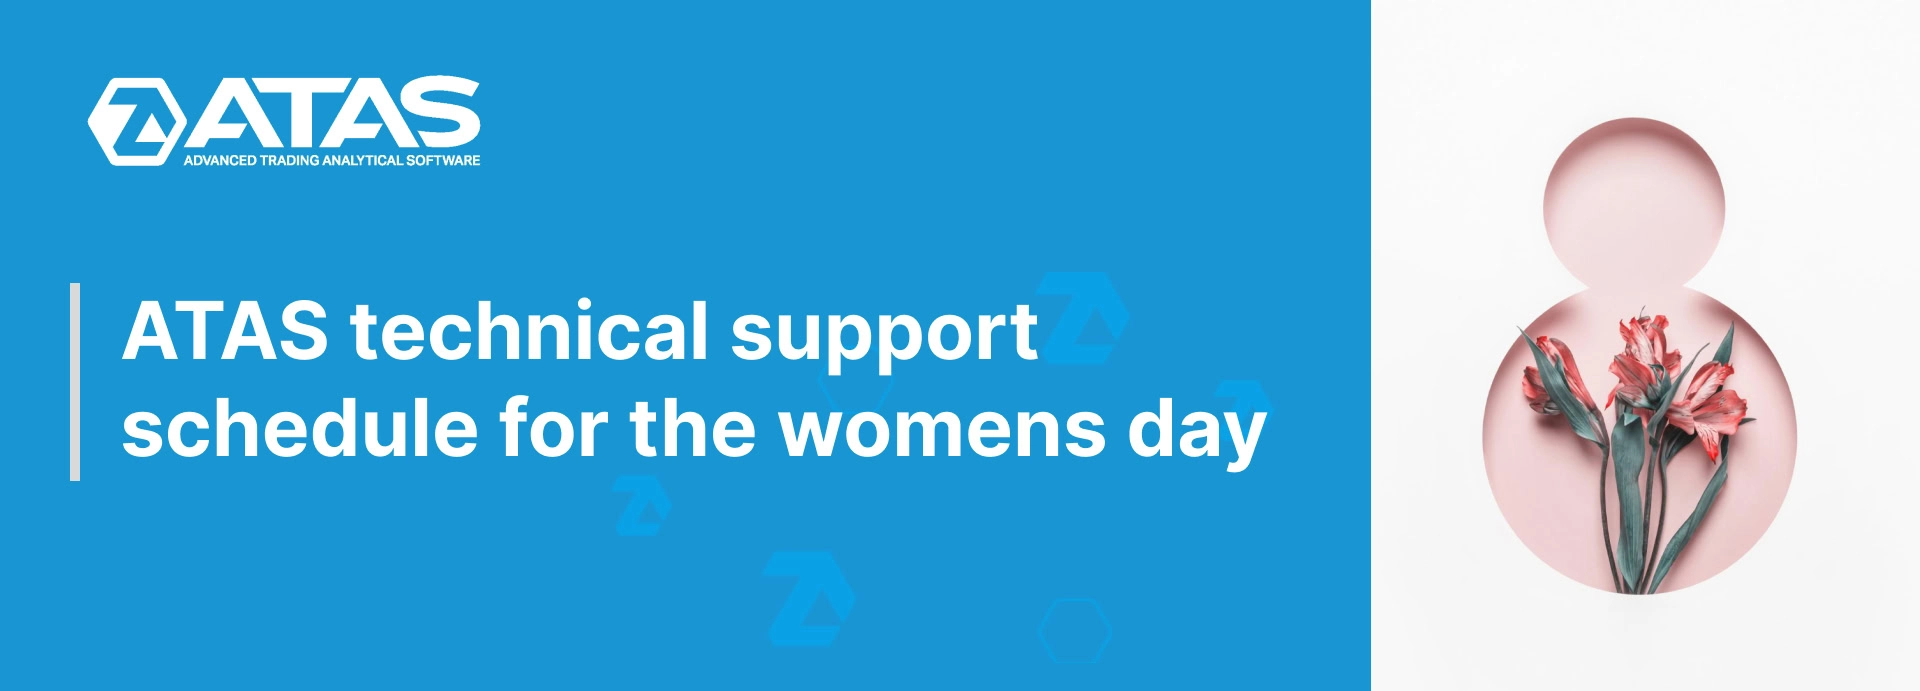 ATAS TECHNICAL SUPPORT SCHEDULE FOR THE WOMEN’S DAY